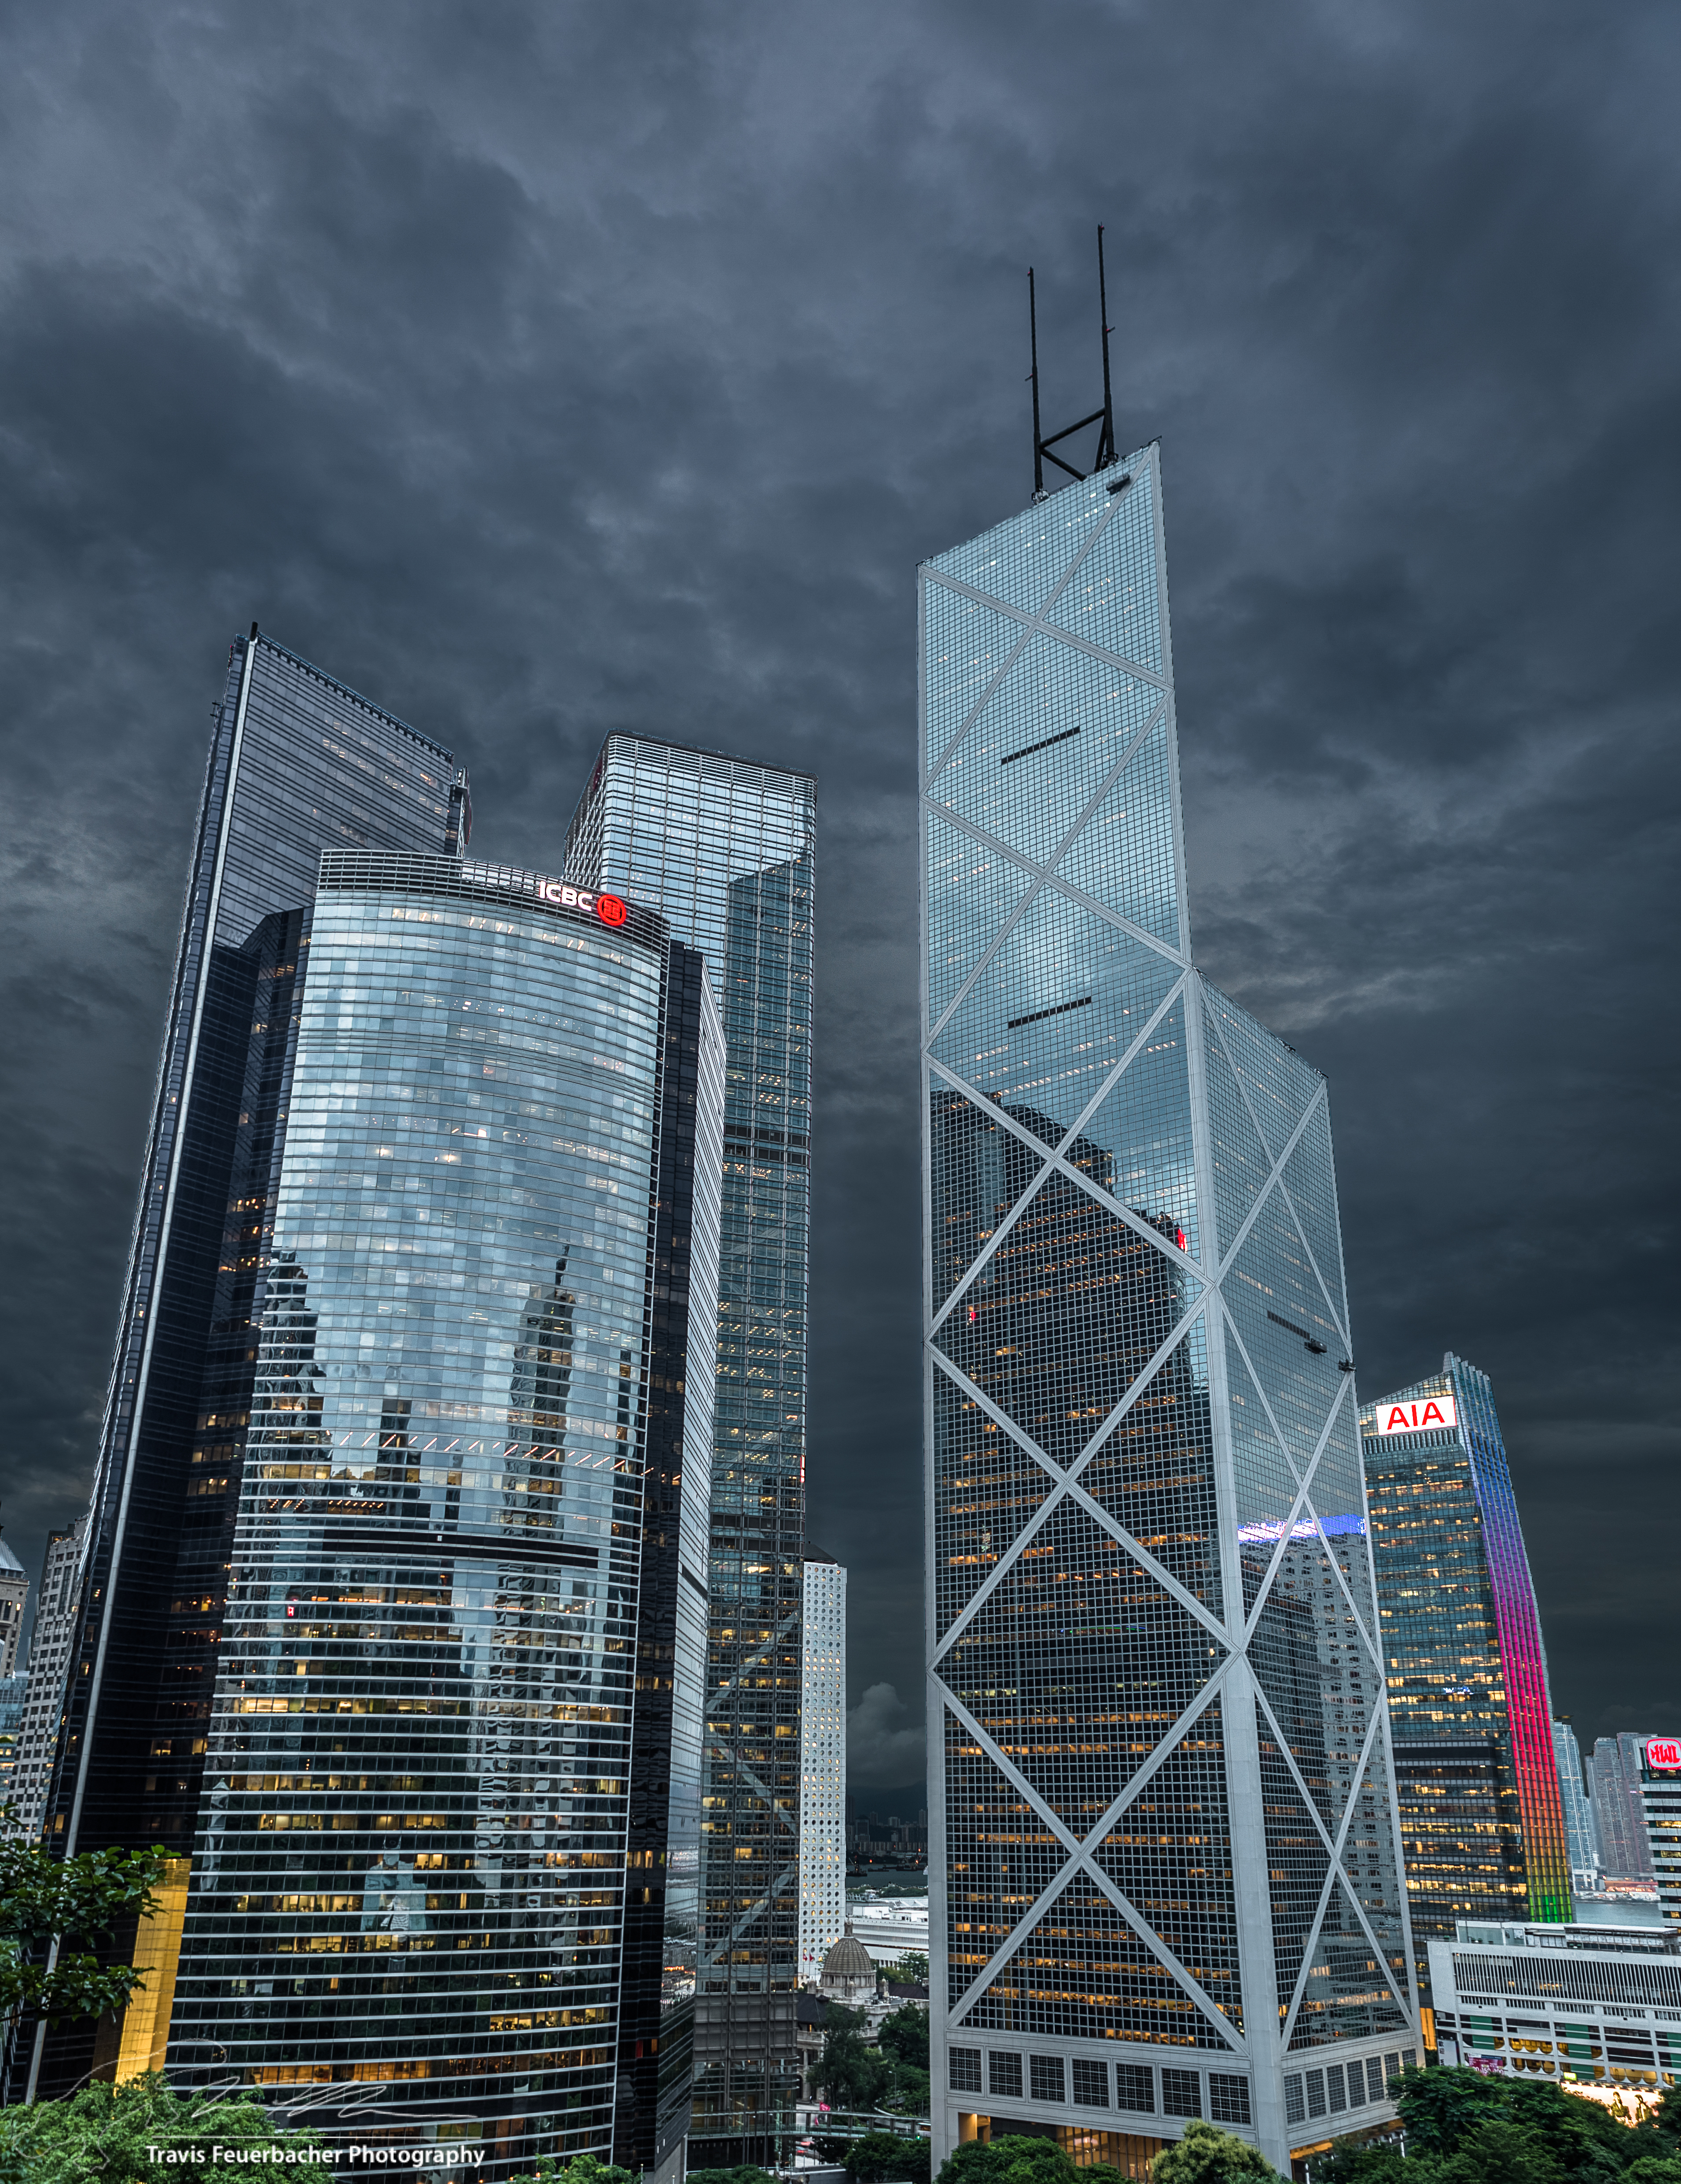 Storm Over Central Hong Kong